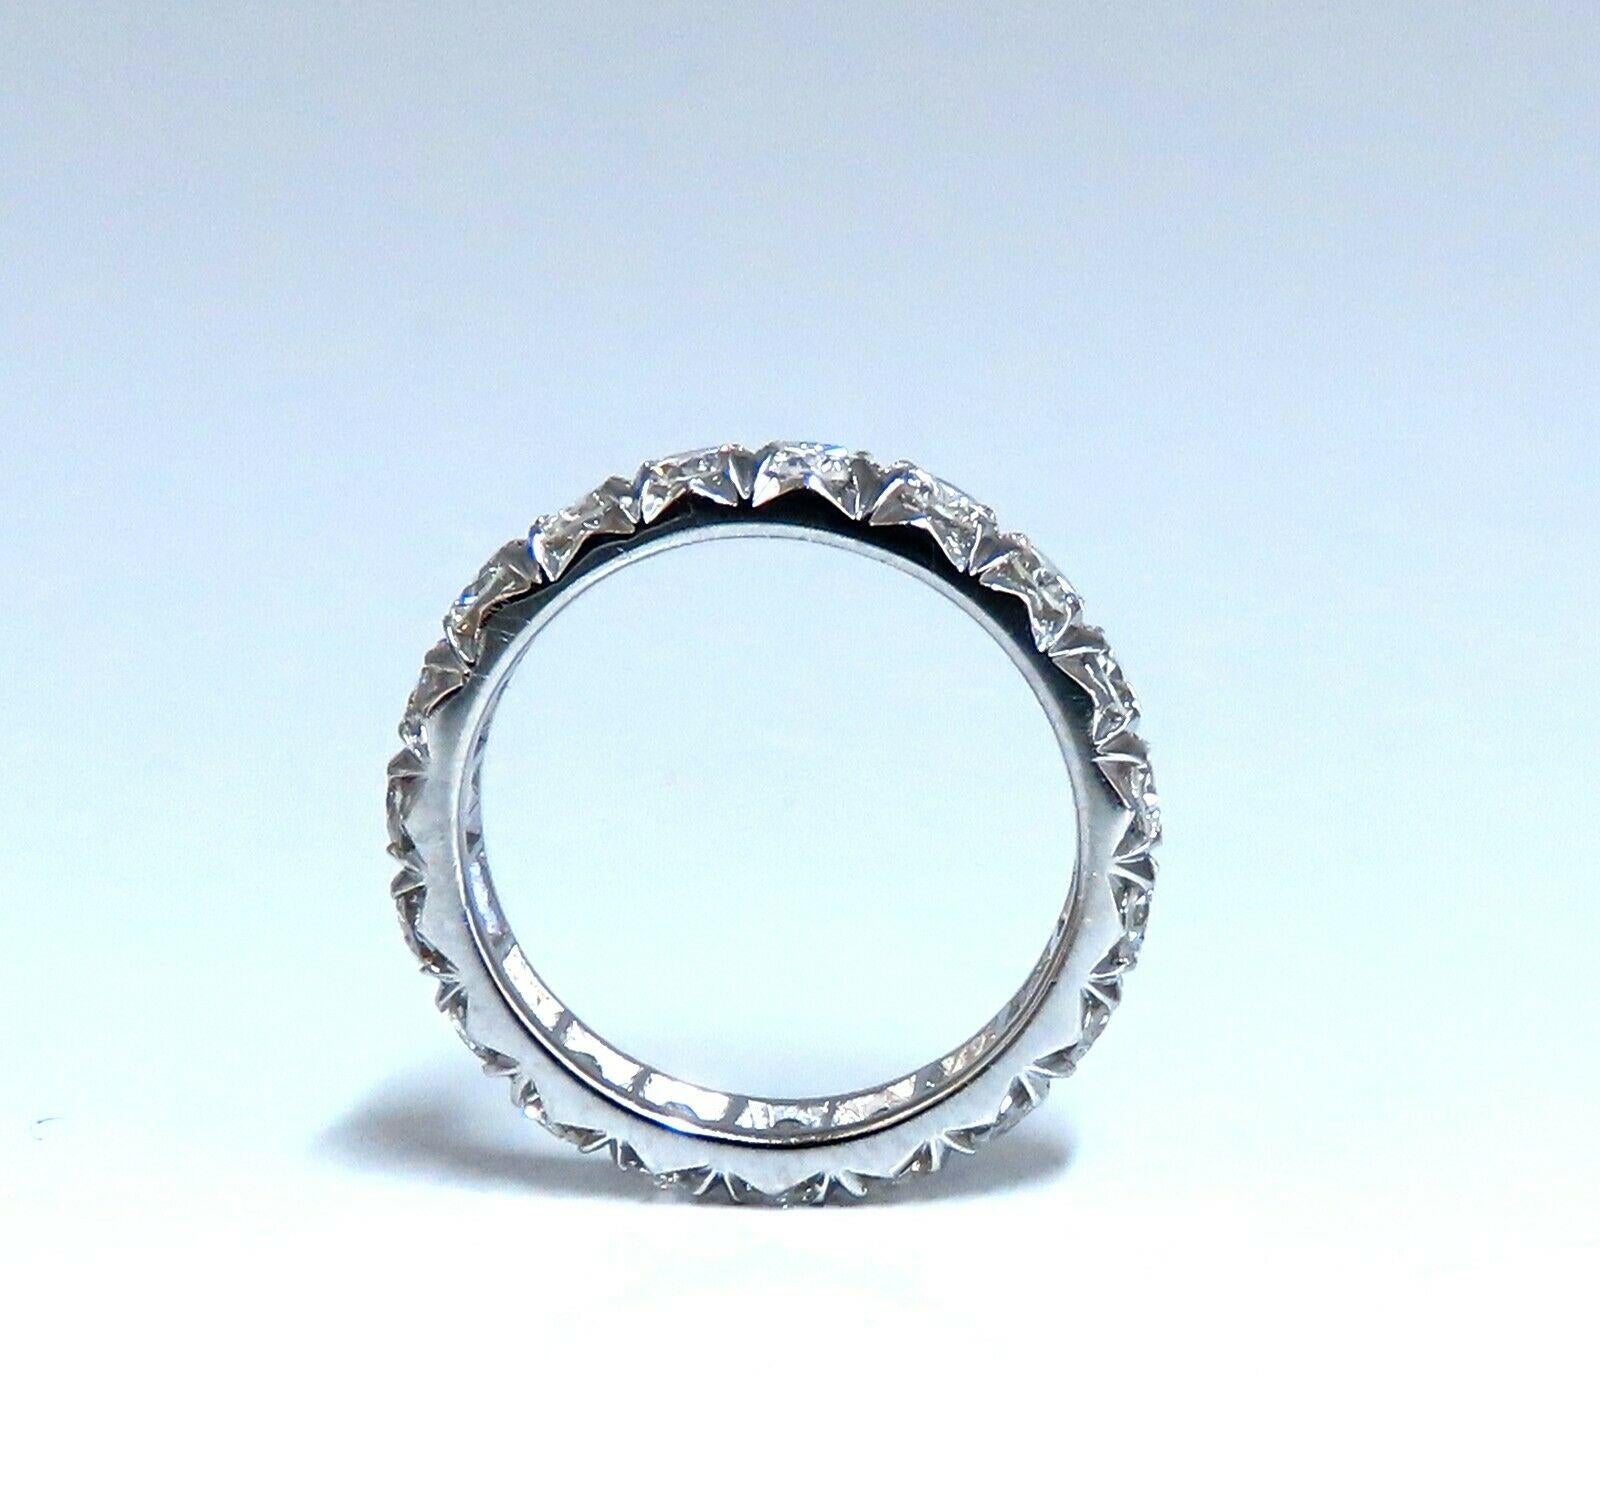 2.10ct. Natural Diamonds eternity band 
Round, Brilliant Cuts

F-G color 

Vs-2 clarity


Raised Bead Set

5.4 grams

3.8mm wide 

2.1mm depth

Size 5.5 and may not resize.


14kt white gold
$8000 Appraisal Certificate to accompany